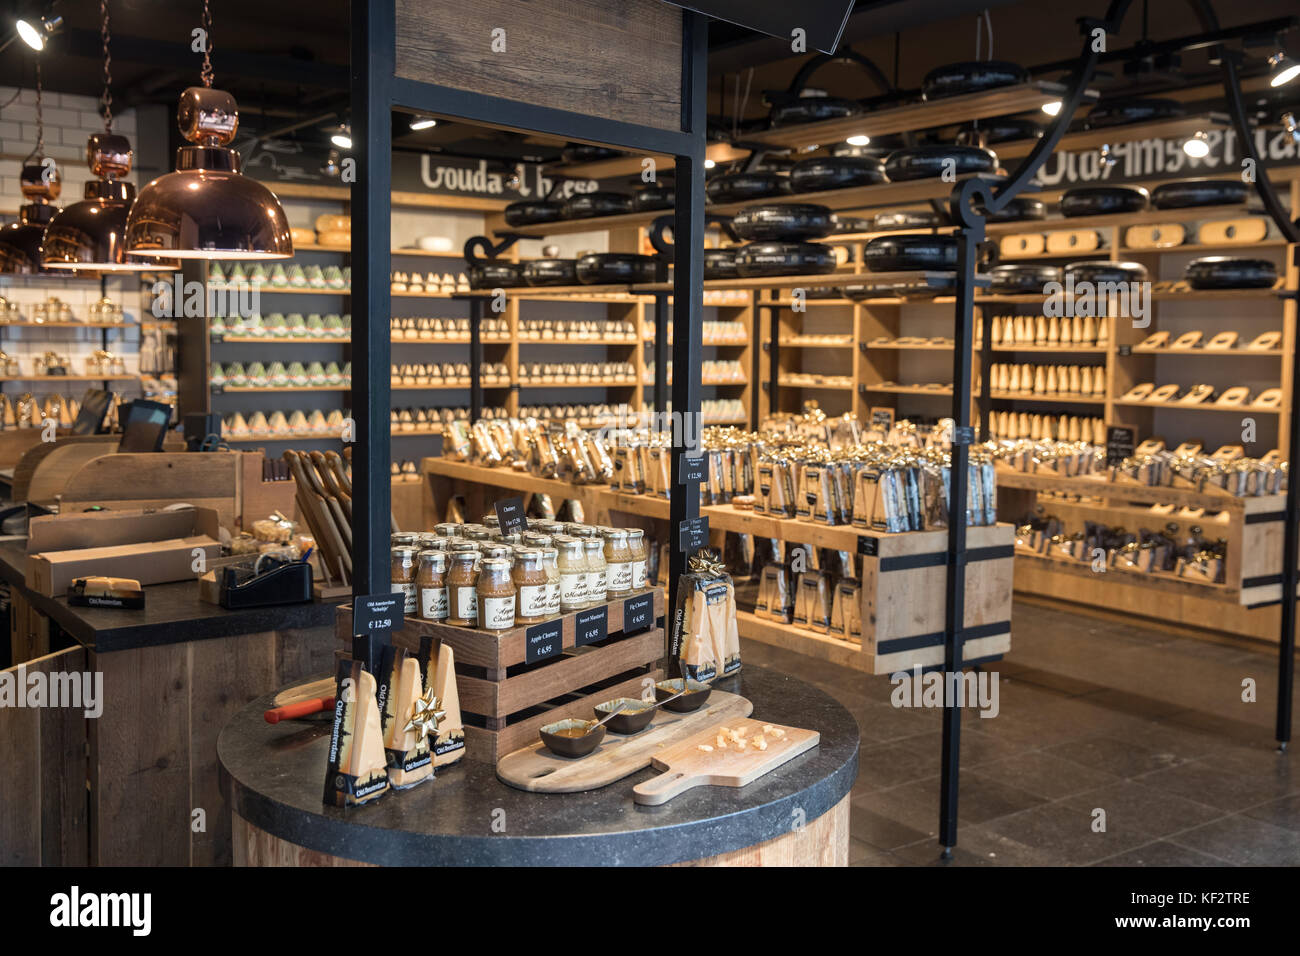 Golden Age Cheese shop in Amsterdam, Netherlands. Stock Photo